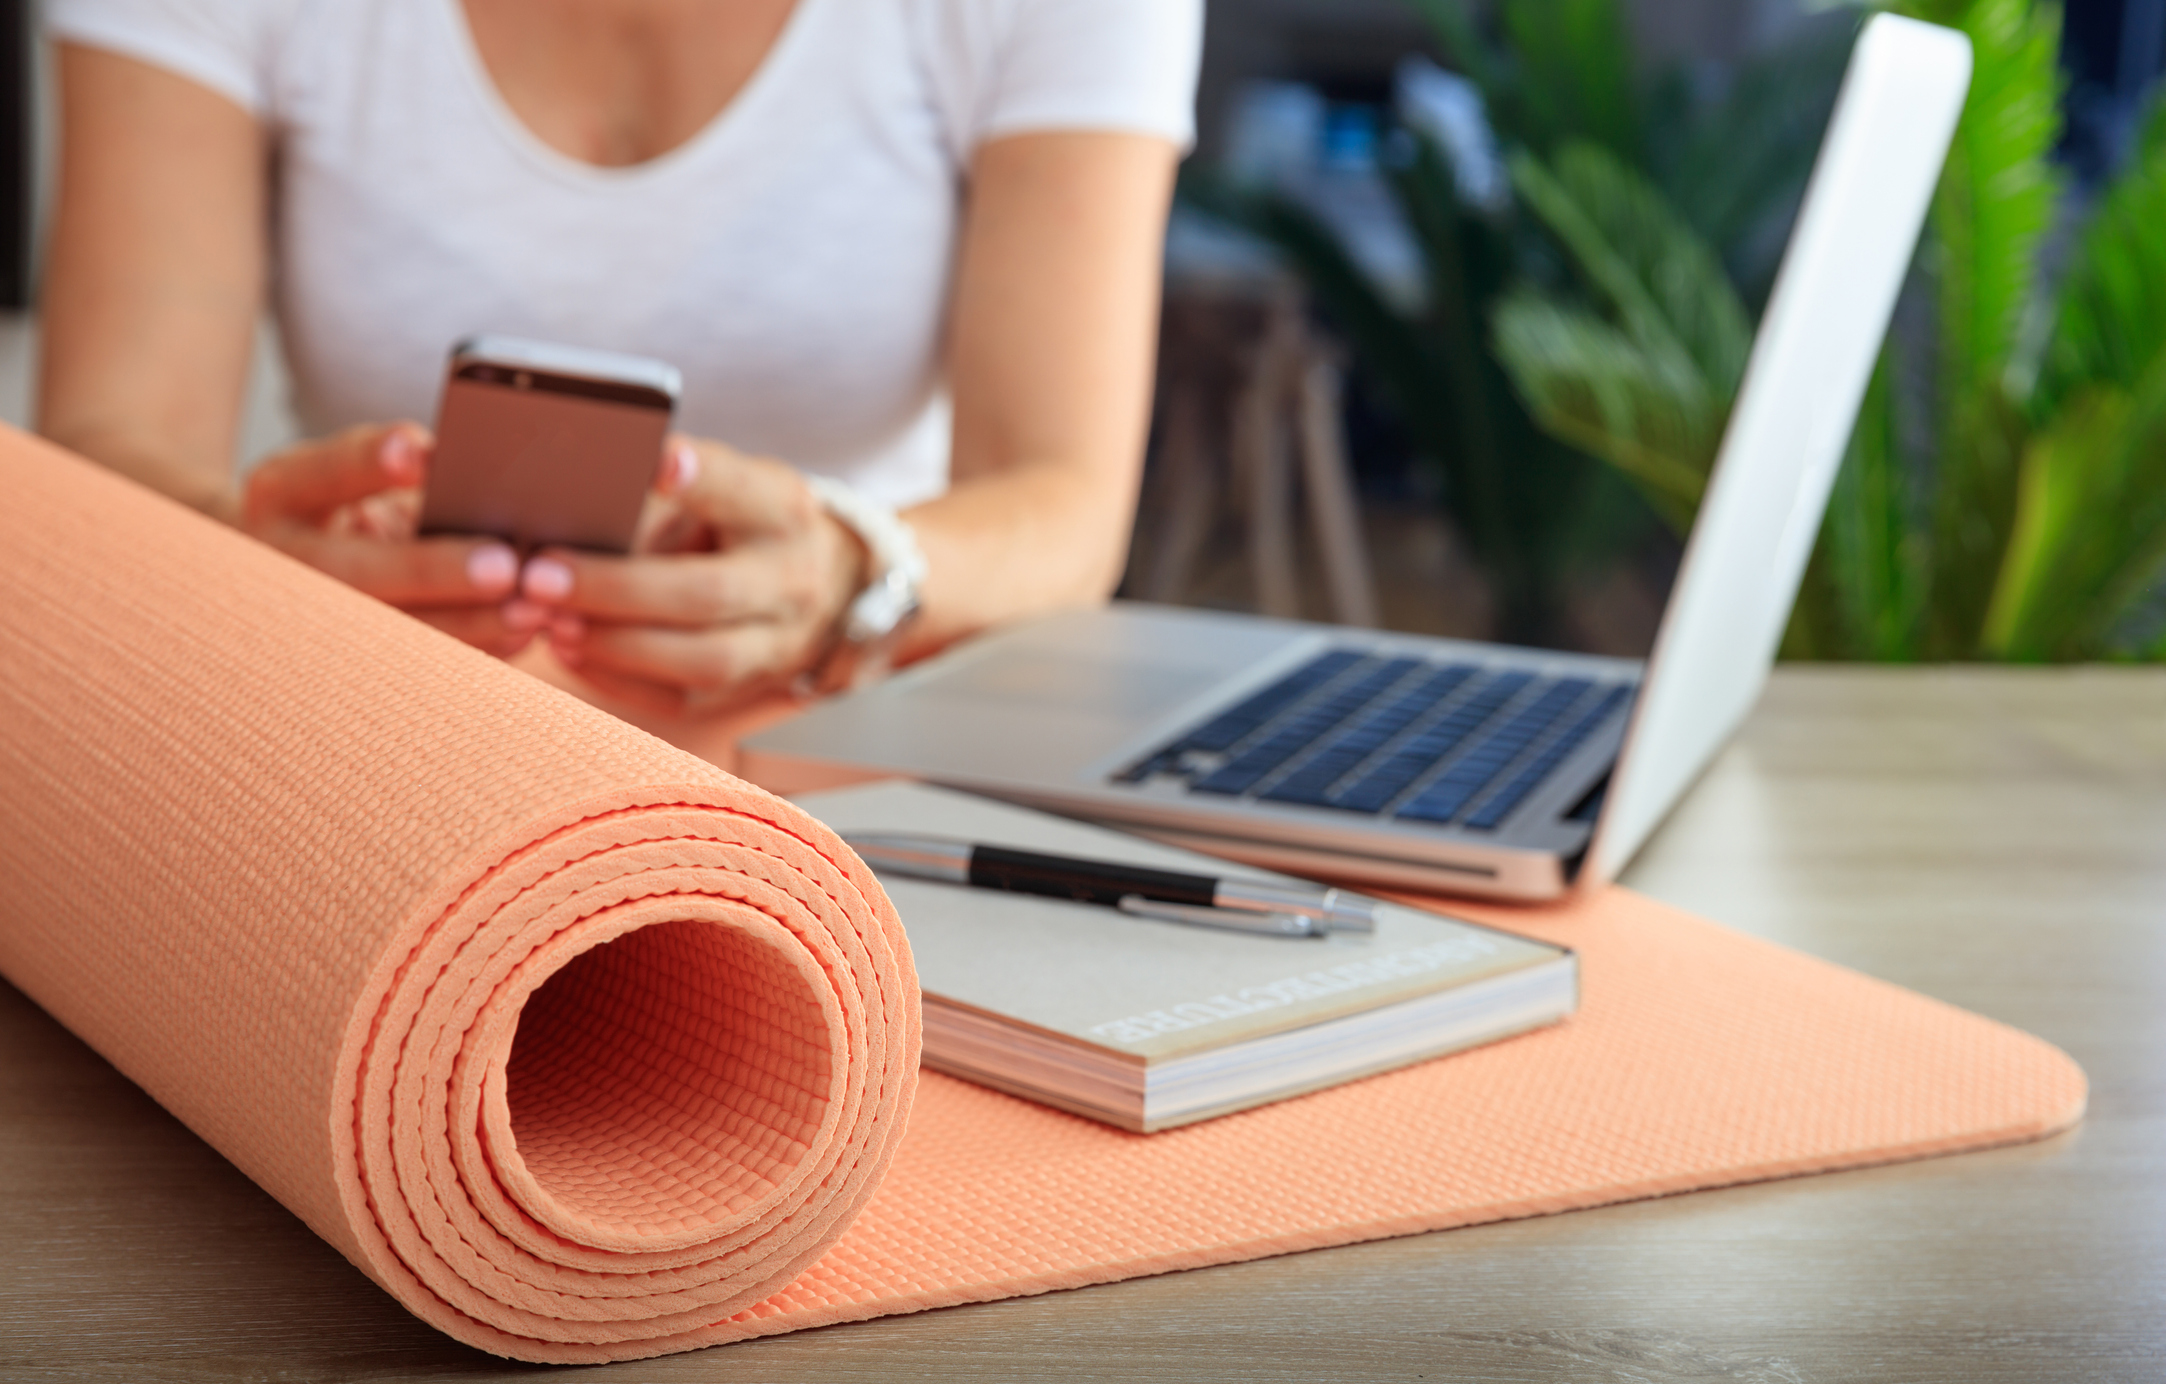 Employee Wellness: Boosting Morale through Customized Promotional Products